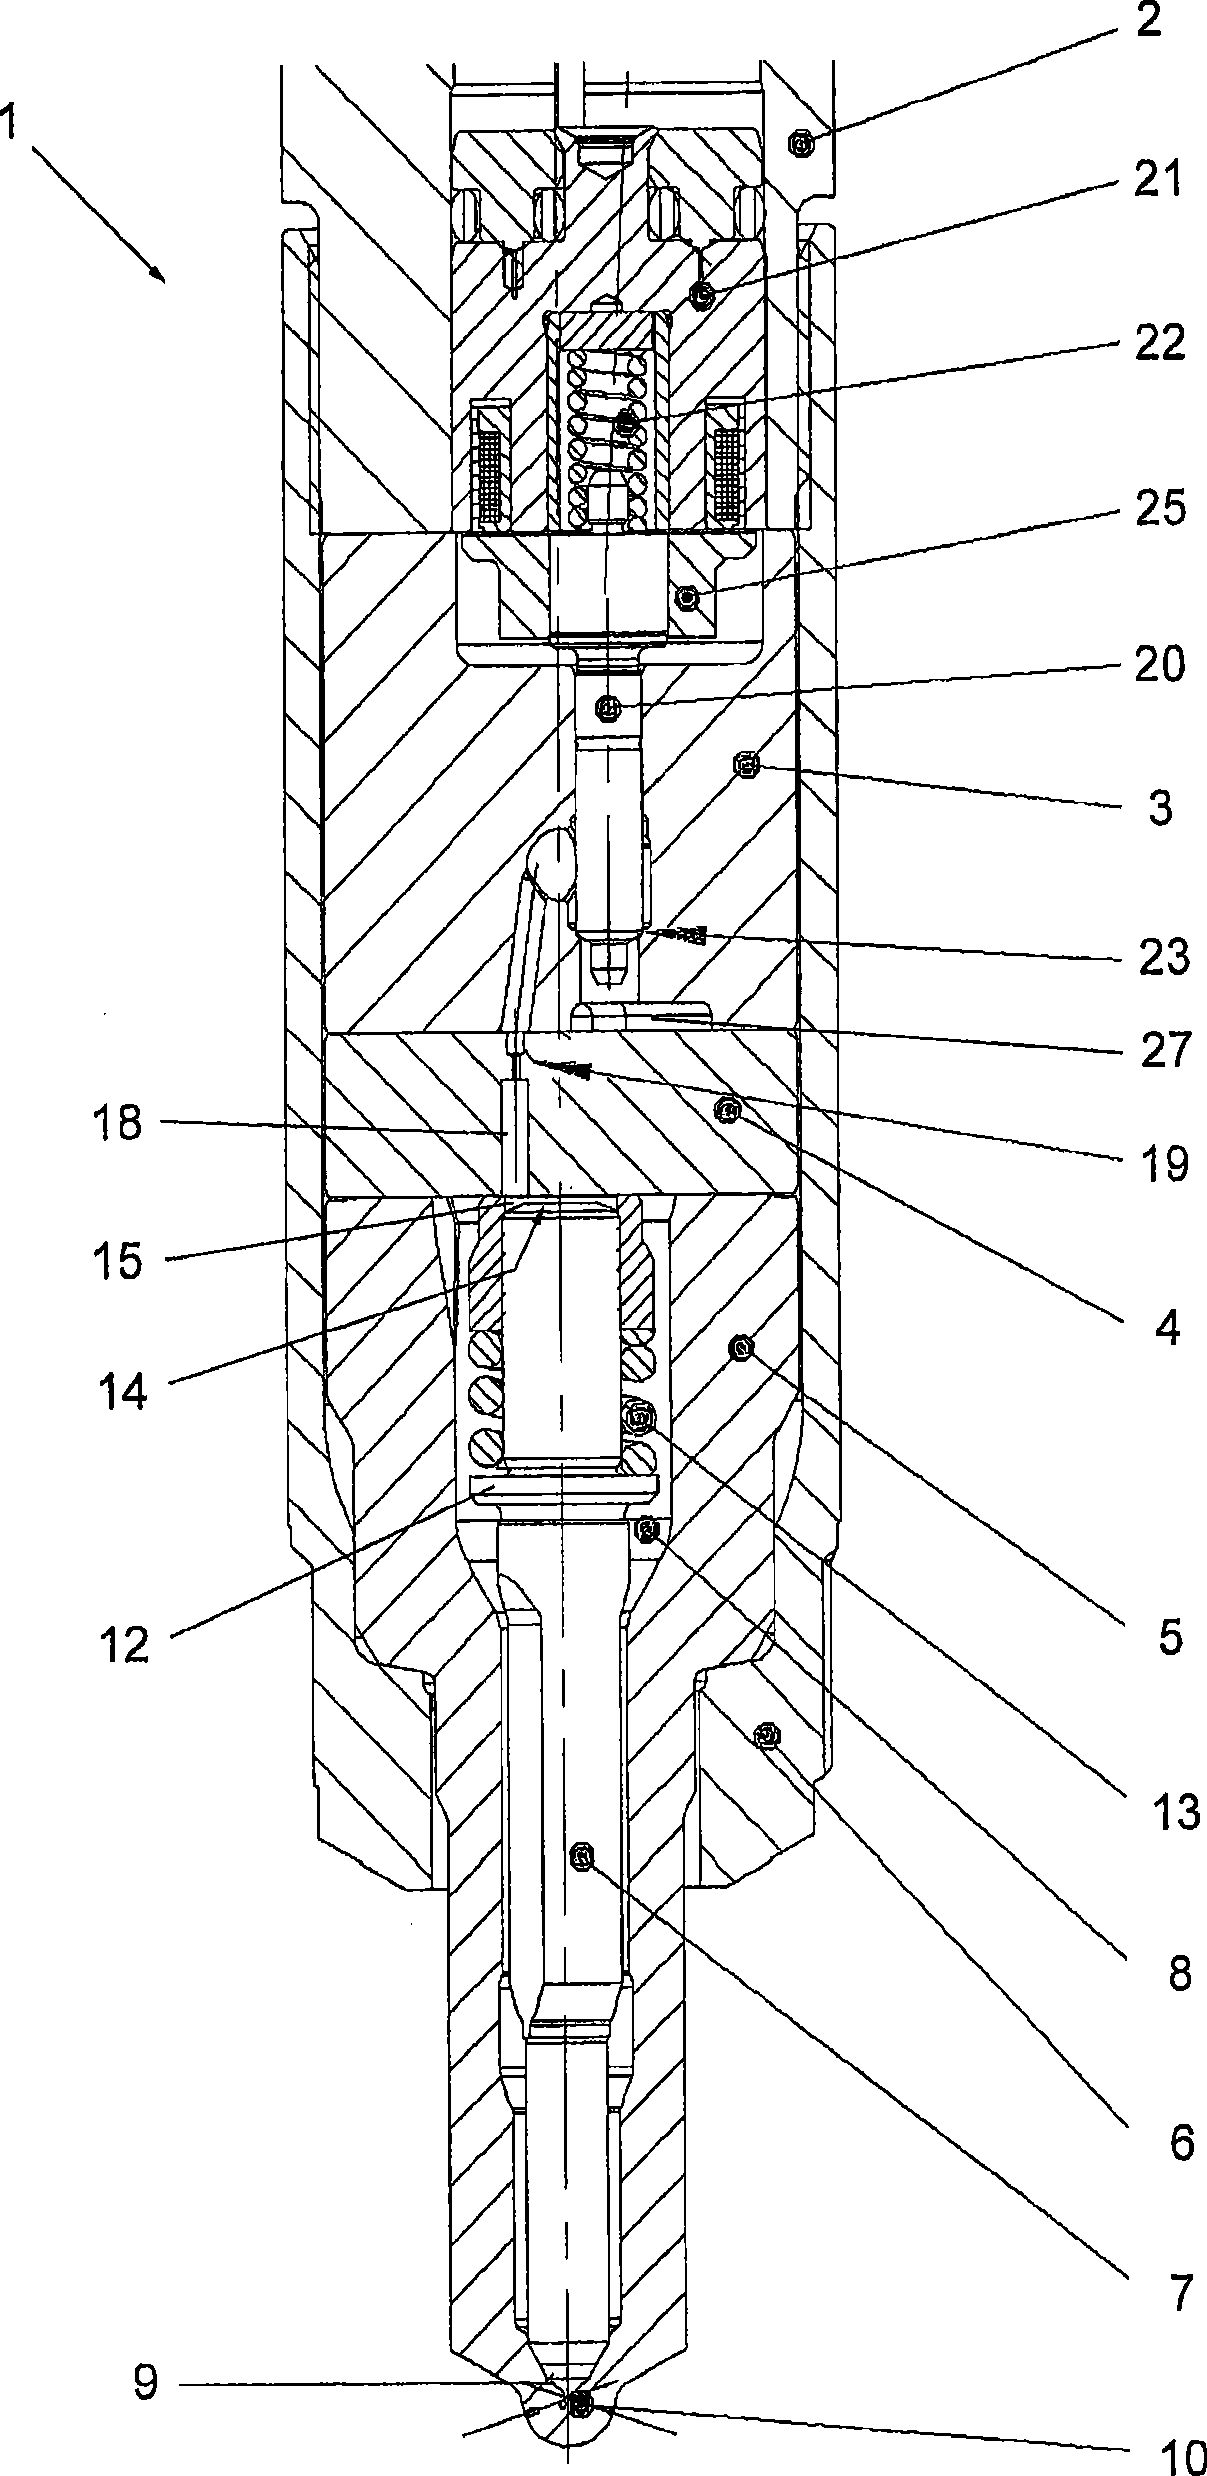 Method of preheating injectors of internal combustion engines